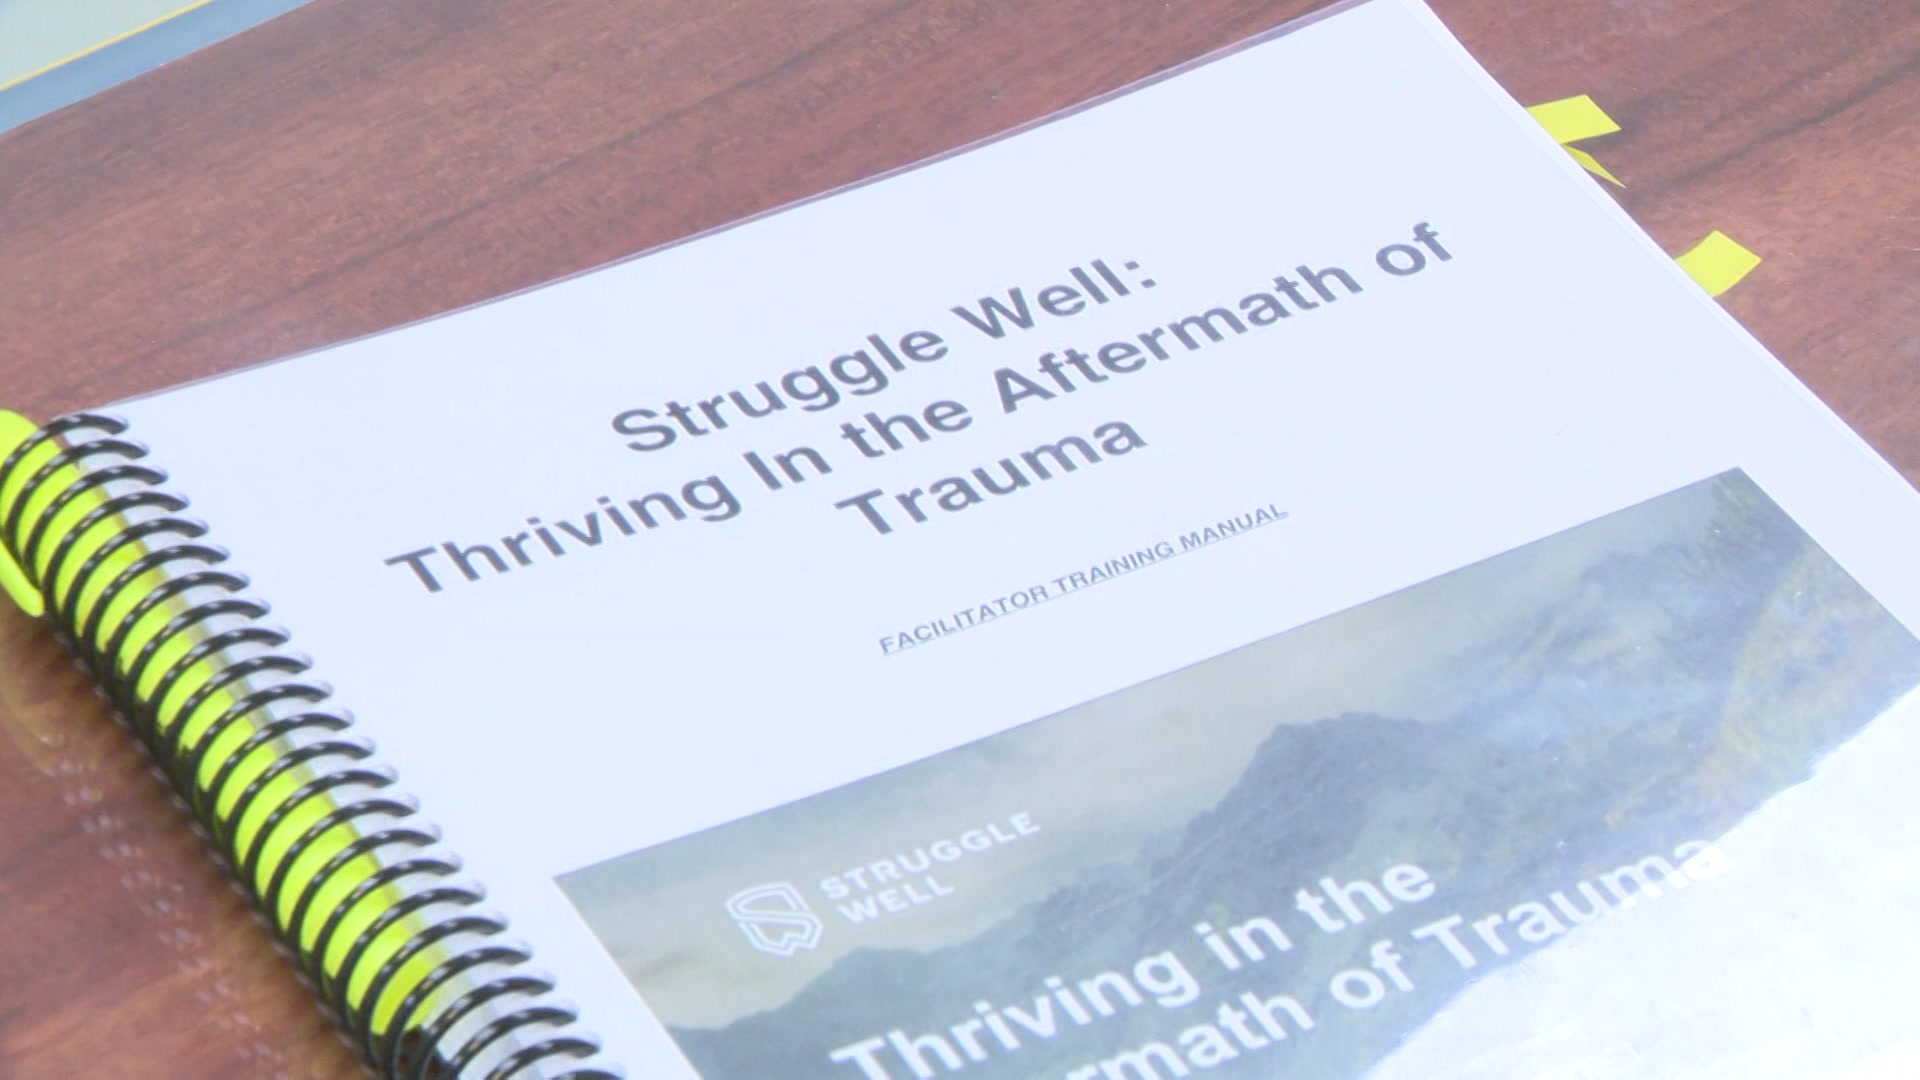 ‘To Police Well, You Have To Be Well Yourself:’ Program Addresses Officer Mental Health